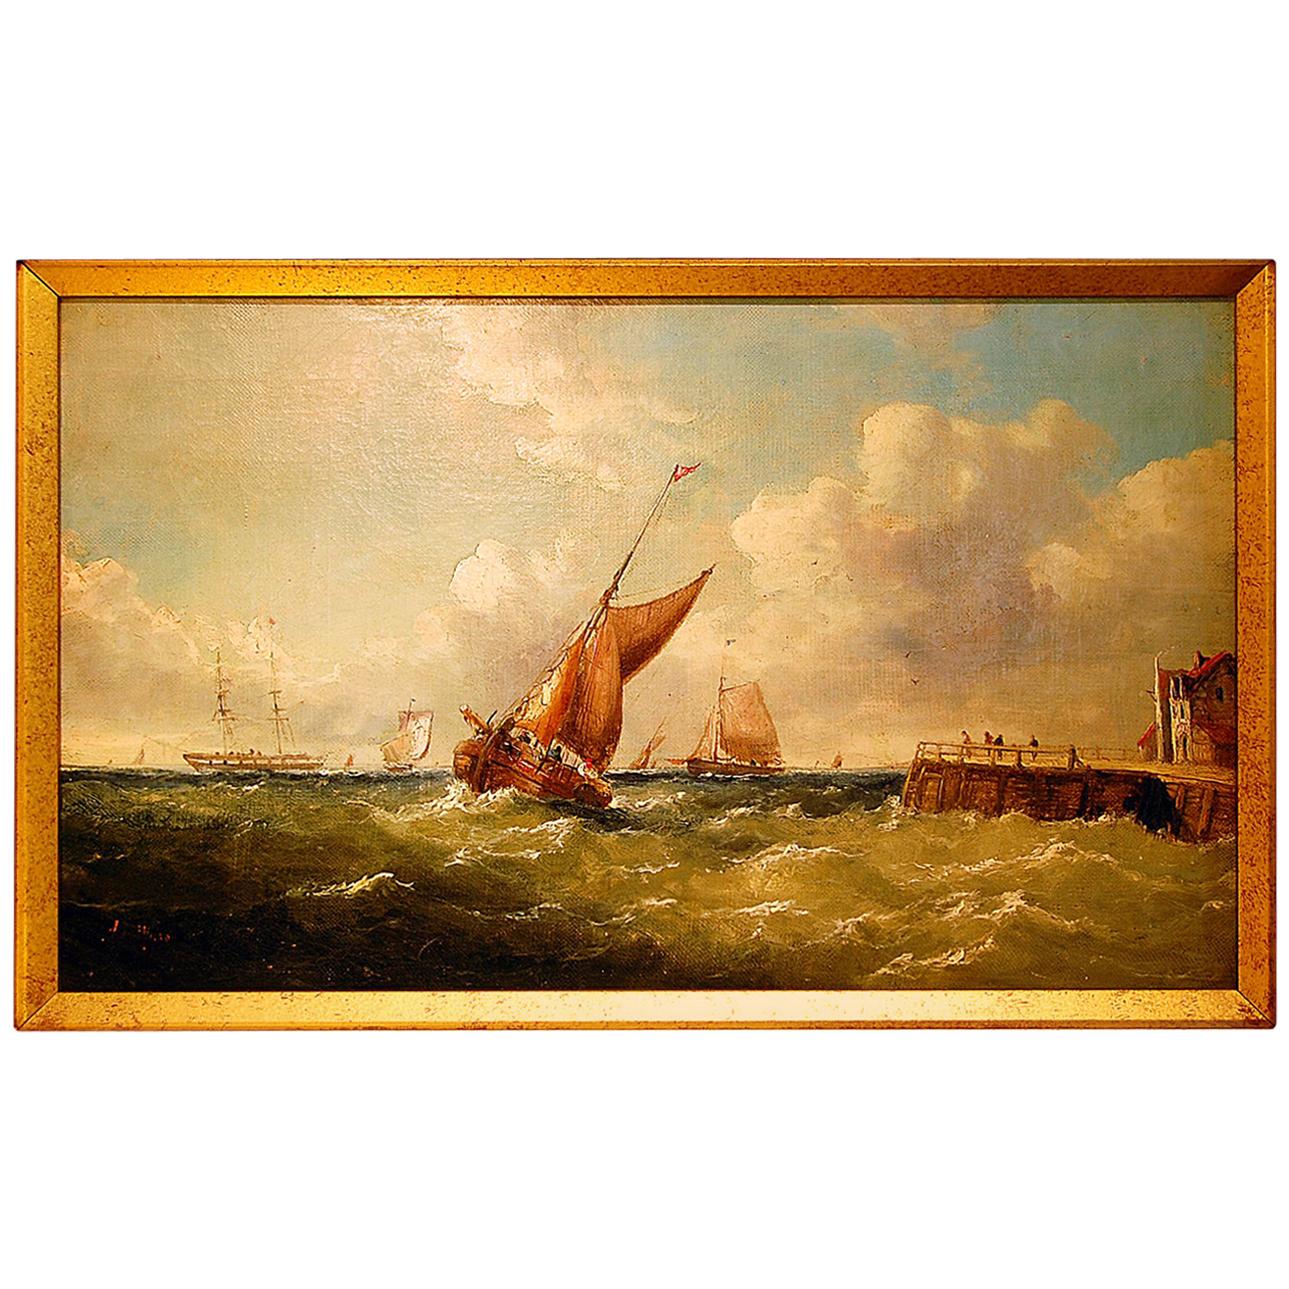 English Original Marine Oil  Painting Signed J Wilson "Shipping off a Jetty"